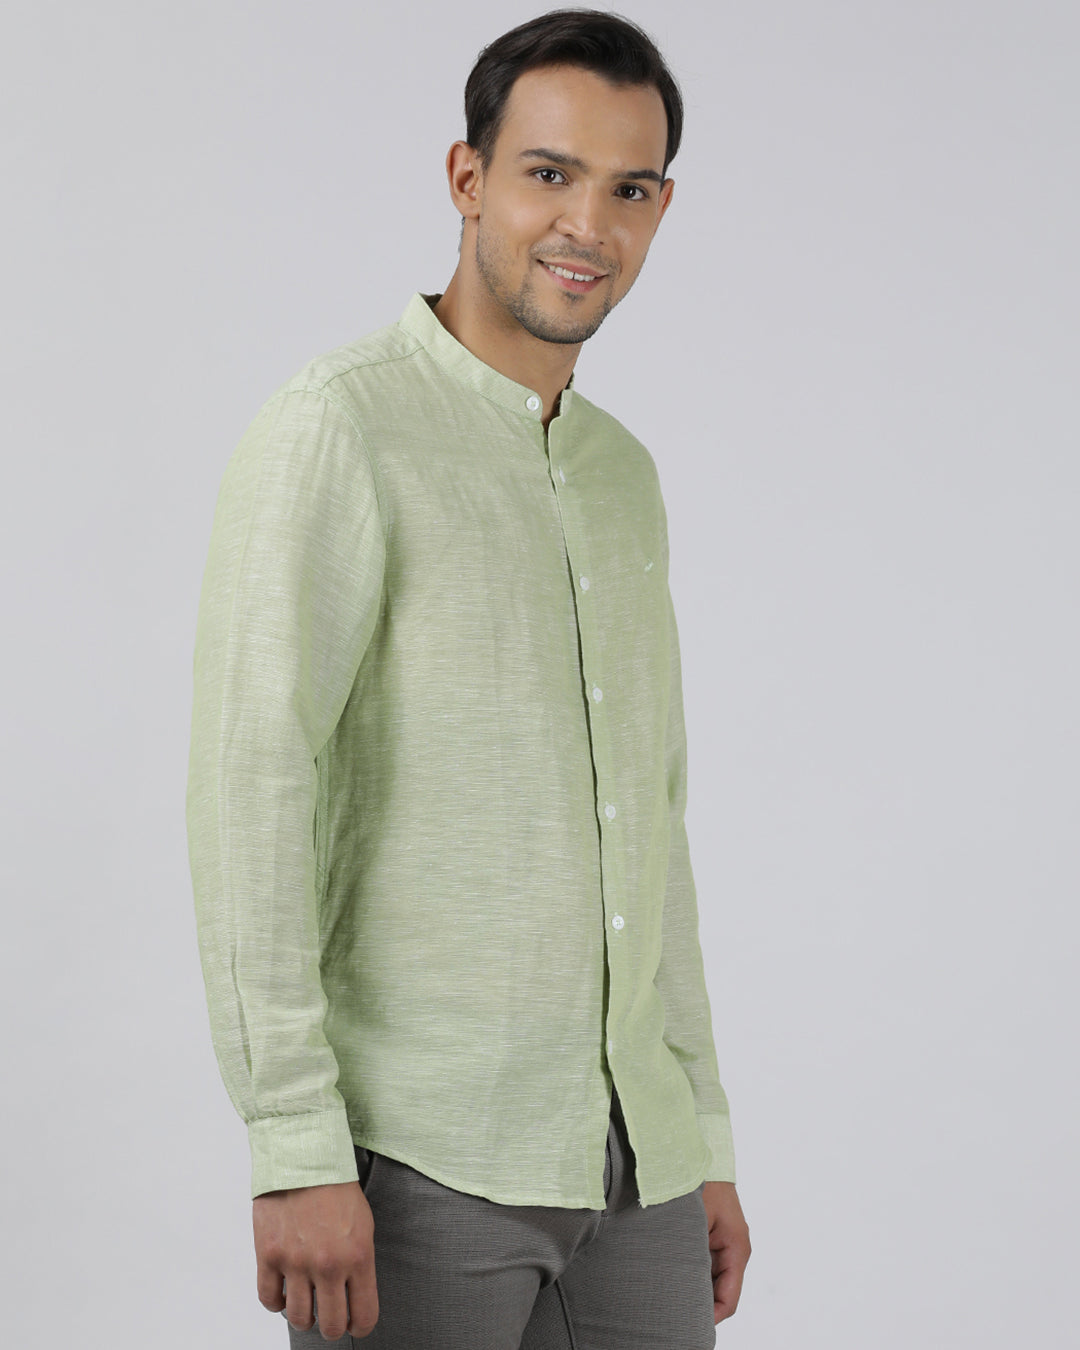 Crocodile Casual Light Green Full Sleeve Regular Fit Solid Shirt with Collar for Men